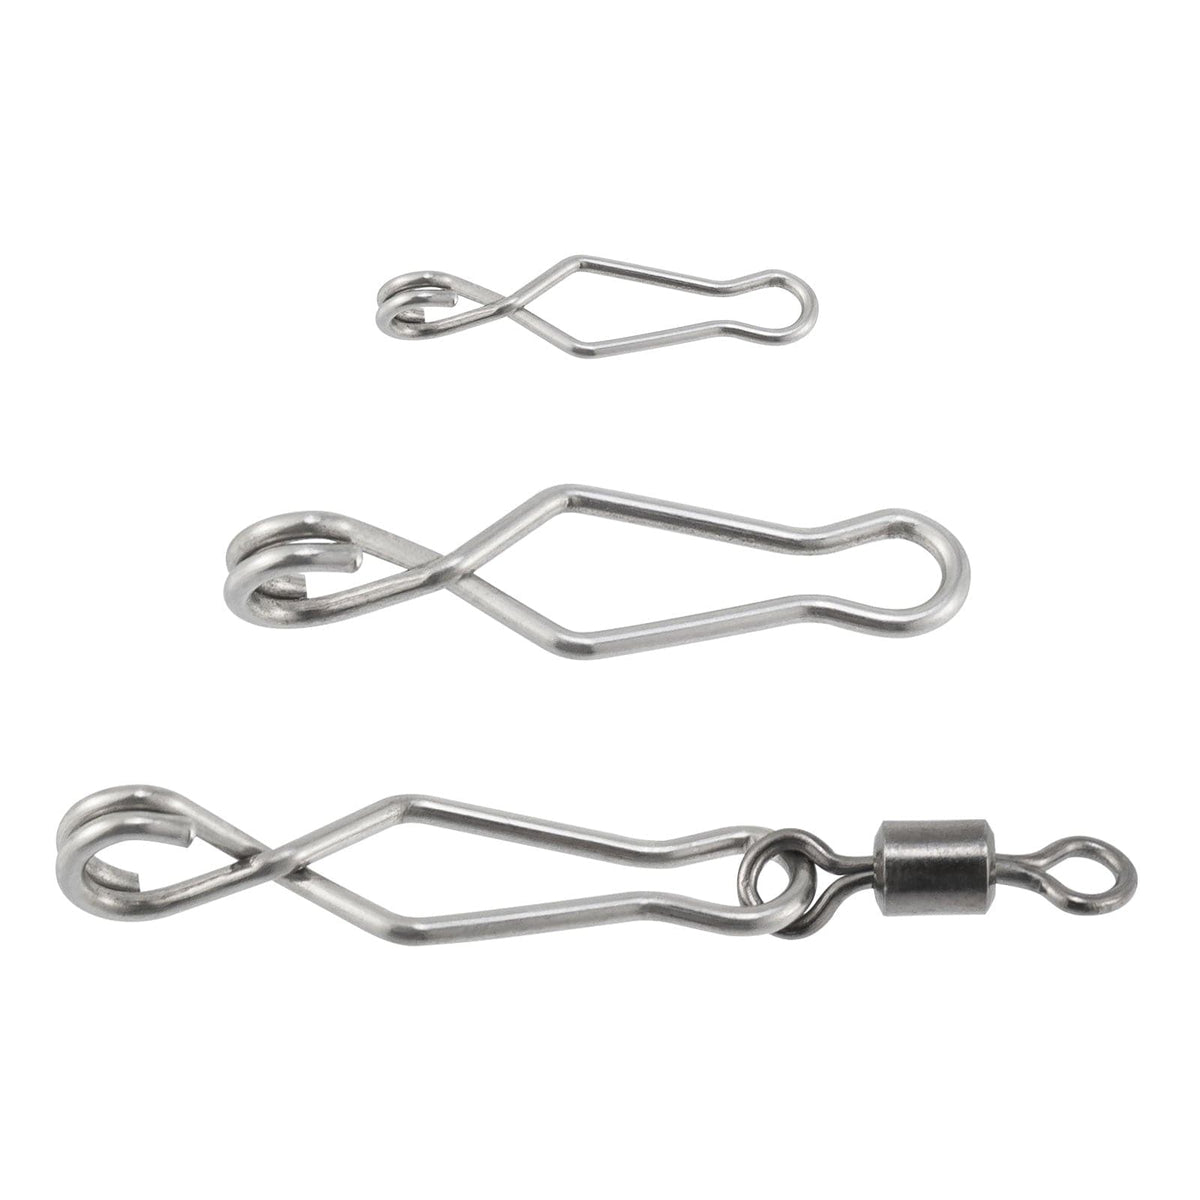 50Pcs Power Clips Speed Clip Fishing Stainless Steel Palestine